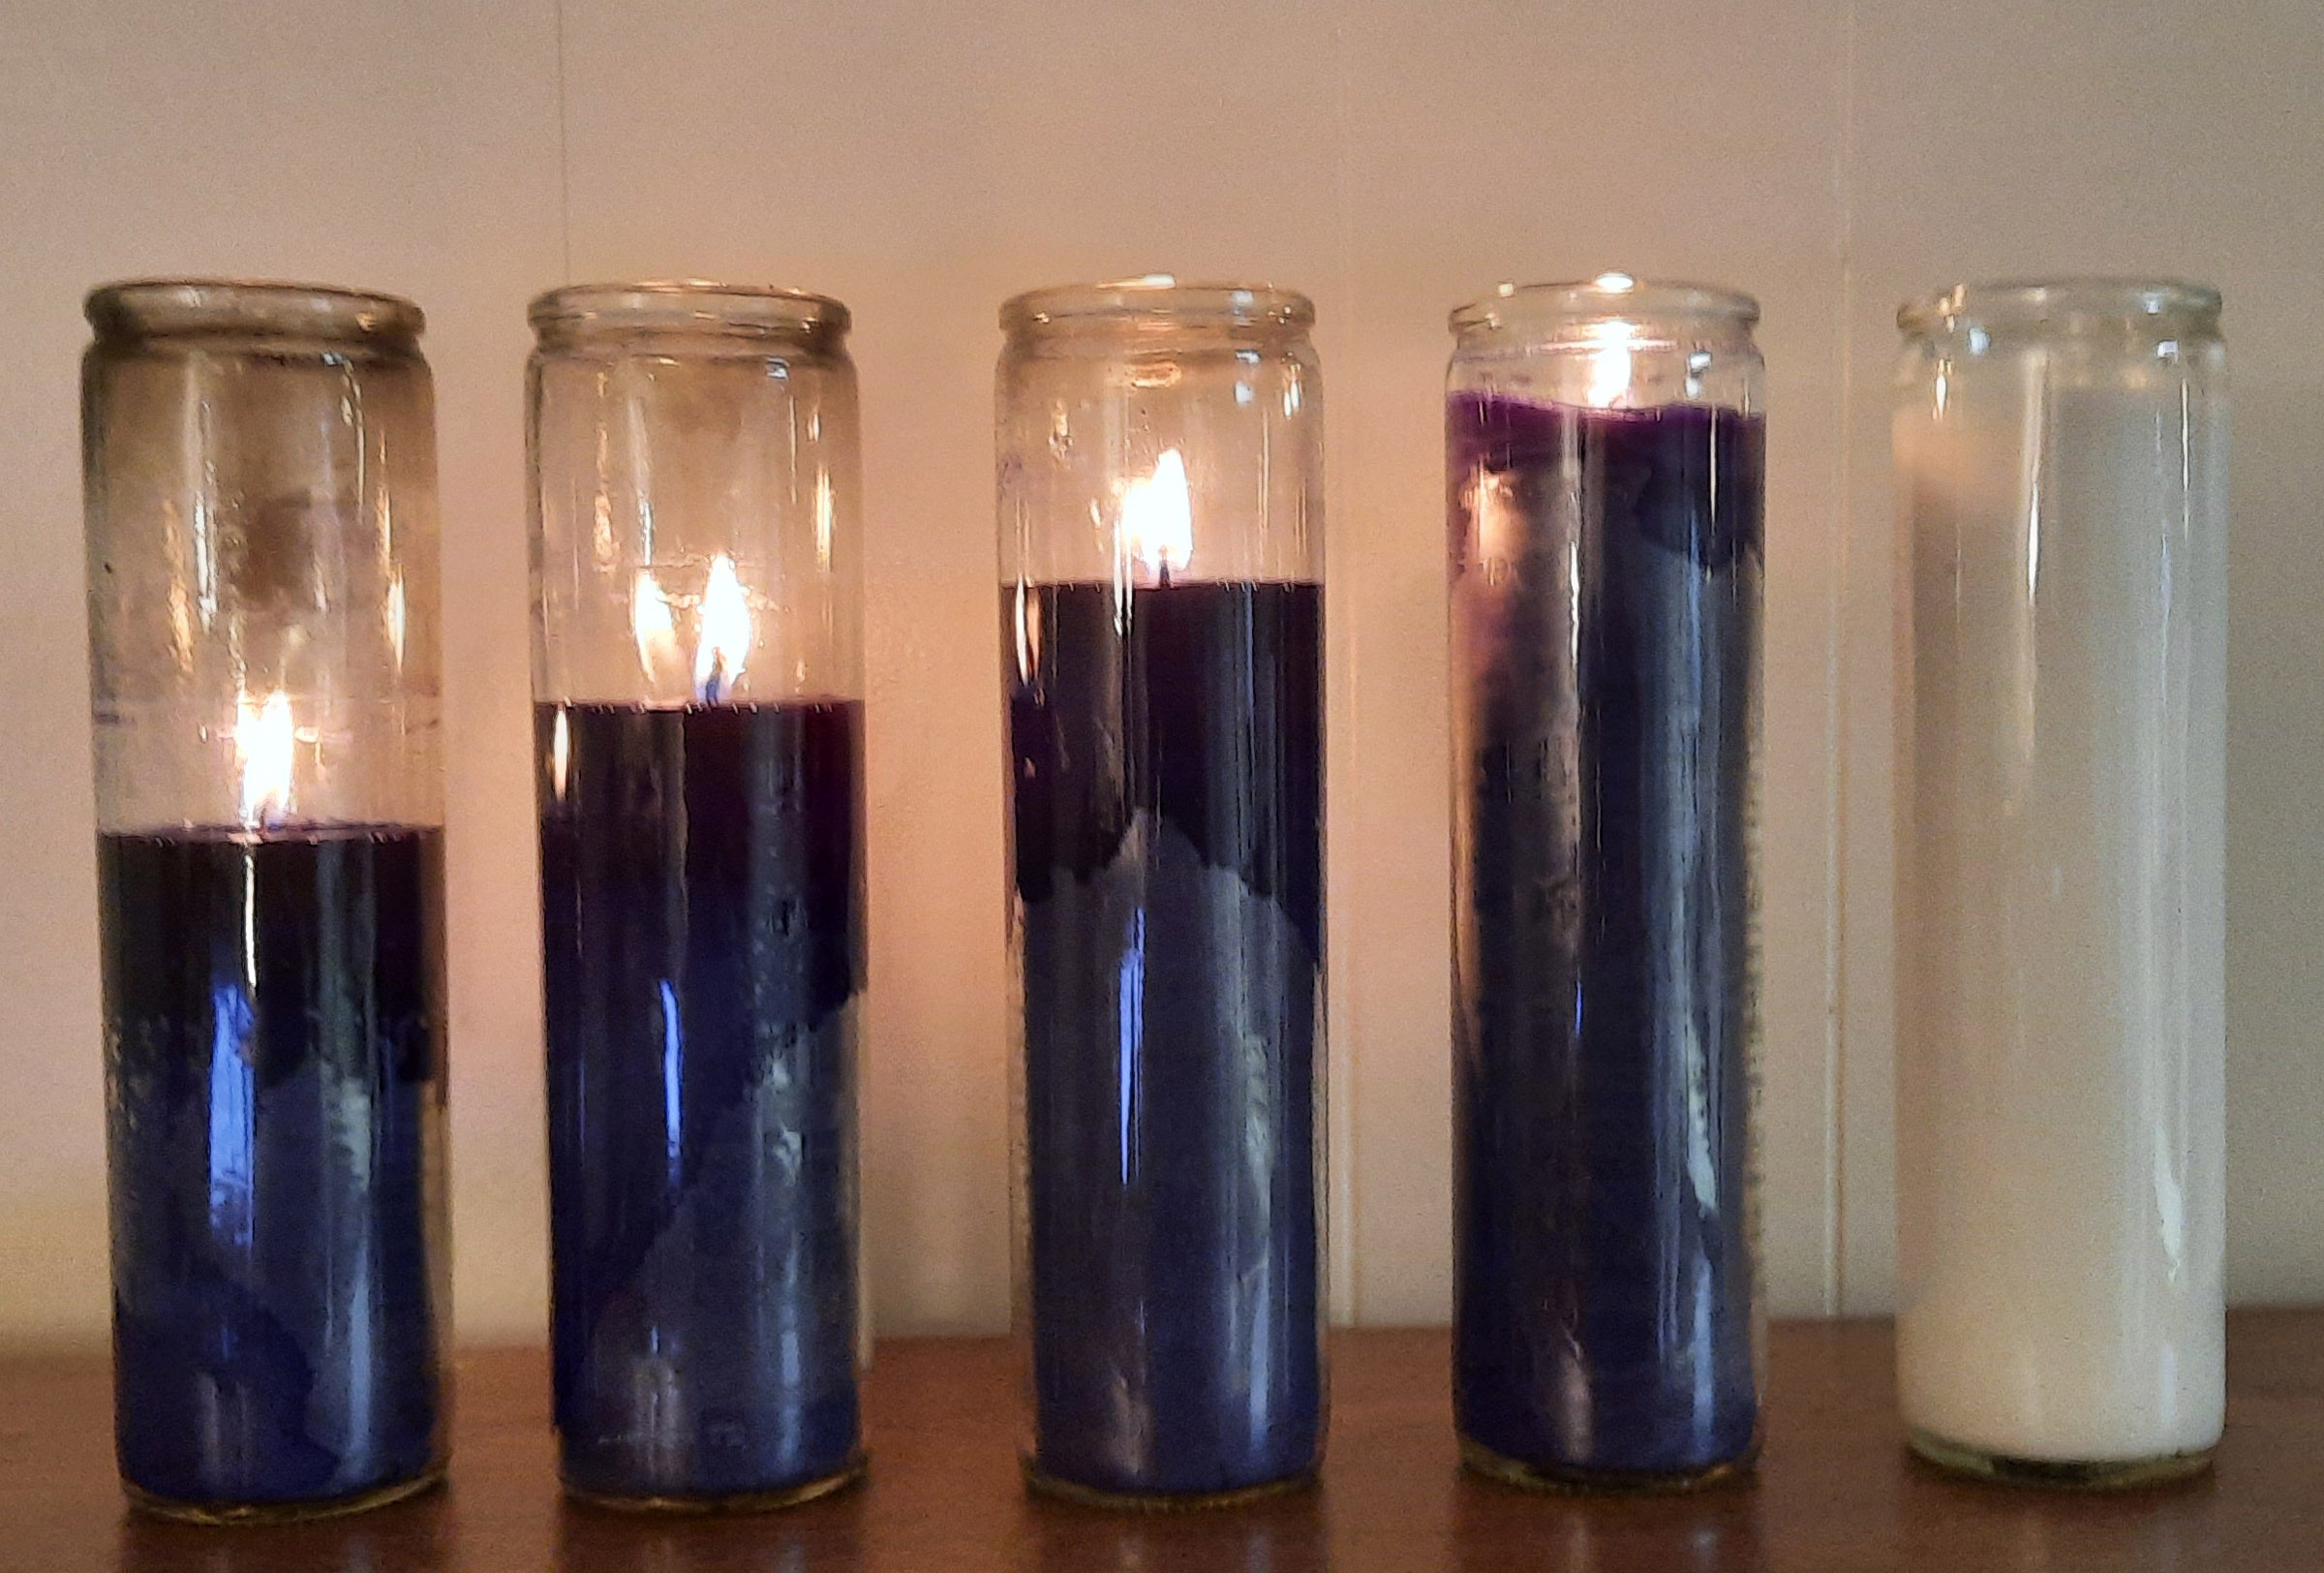 Four lit purple candles and an unlit white candle.